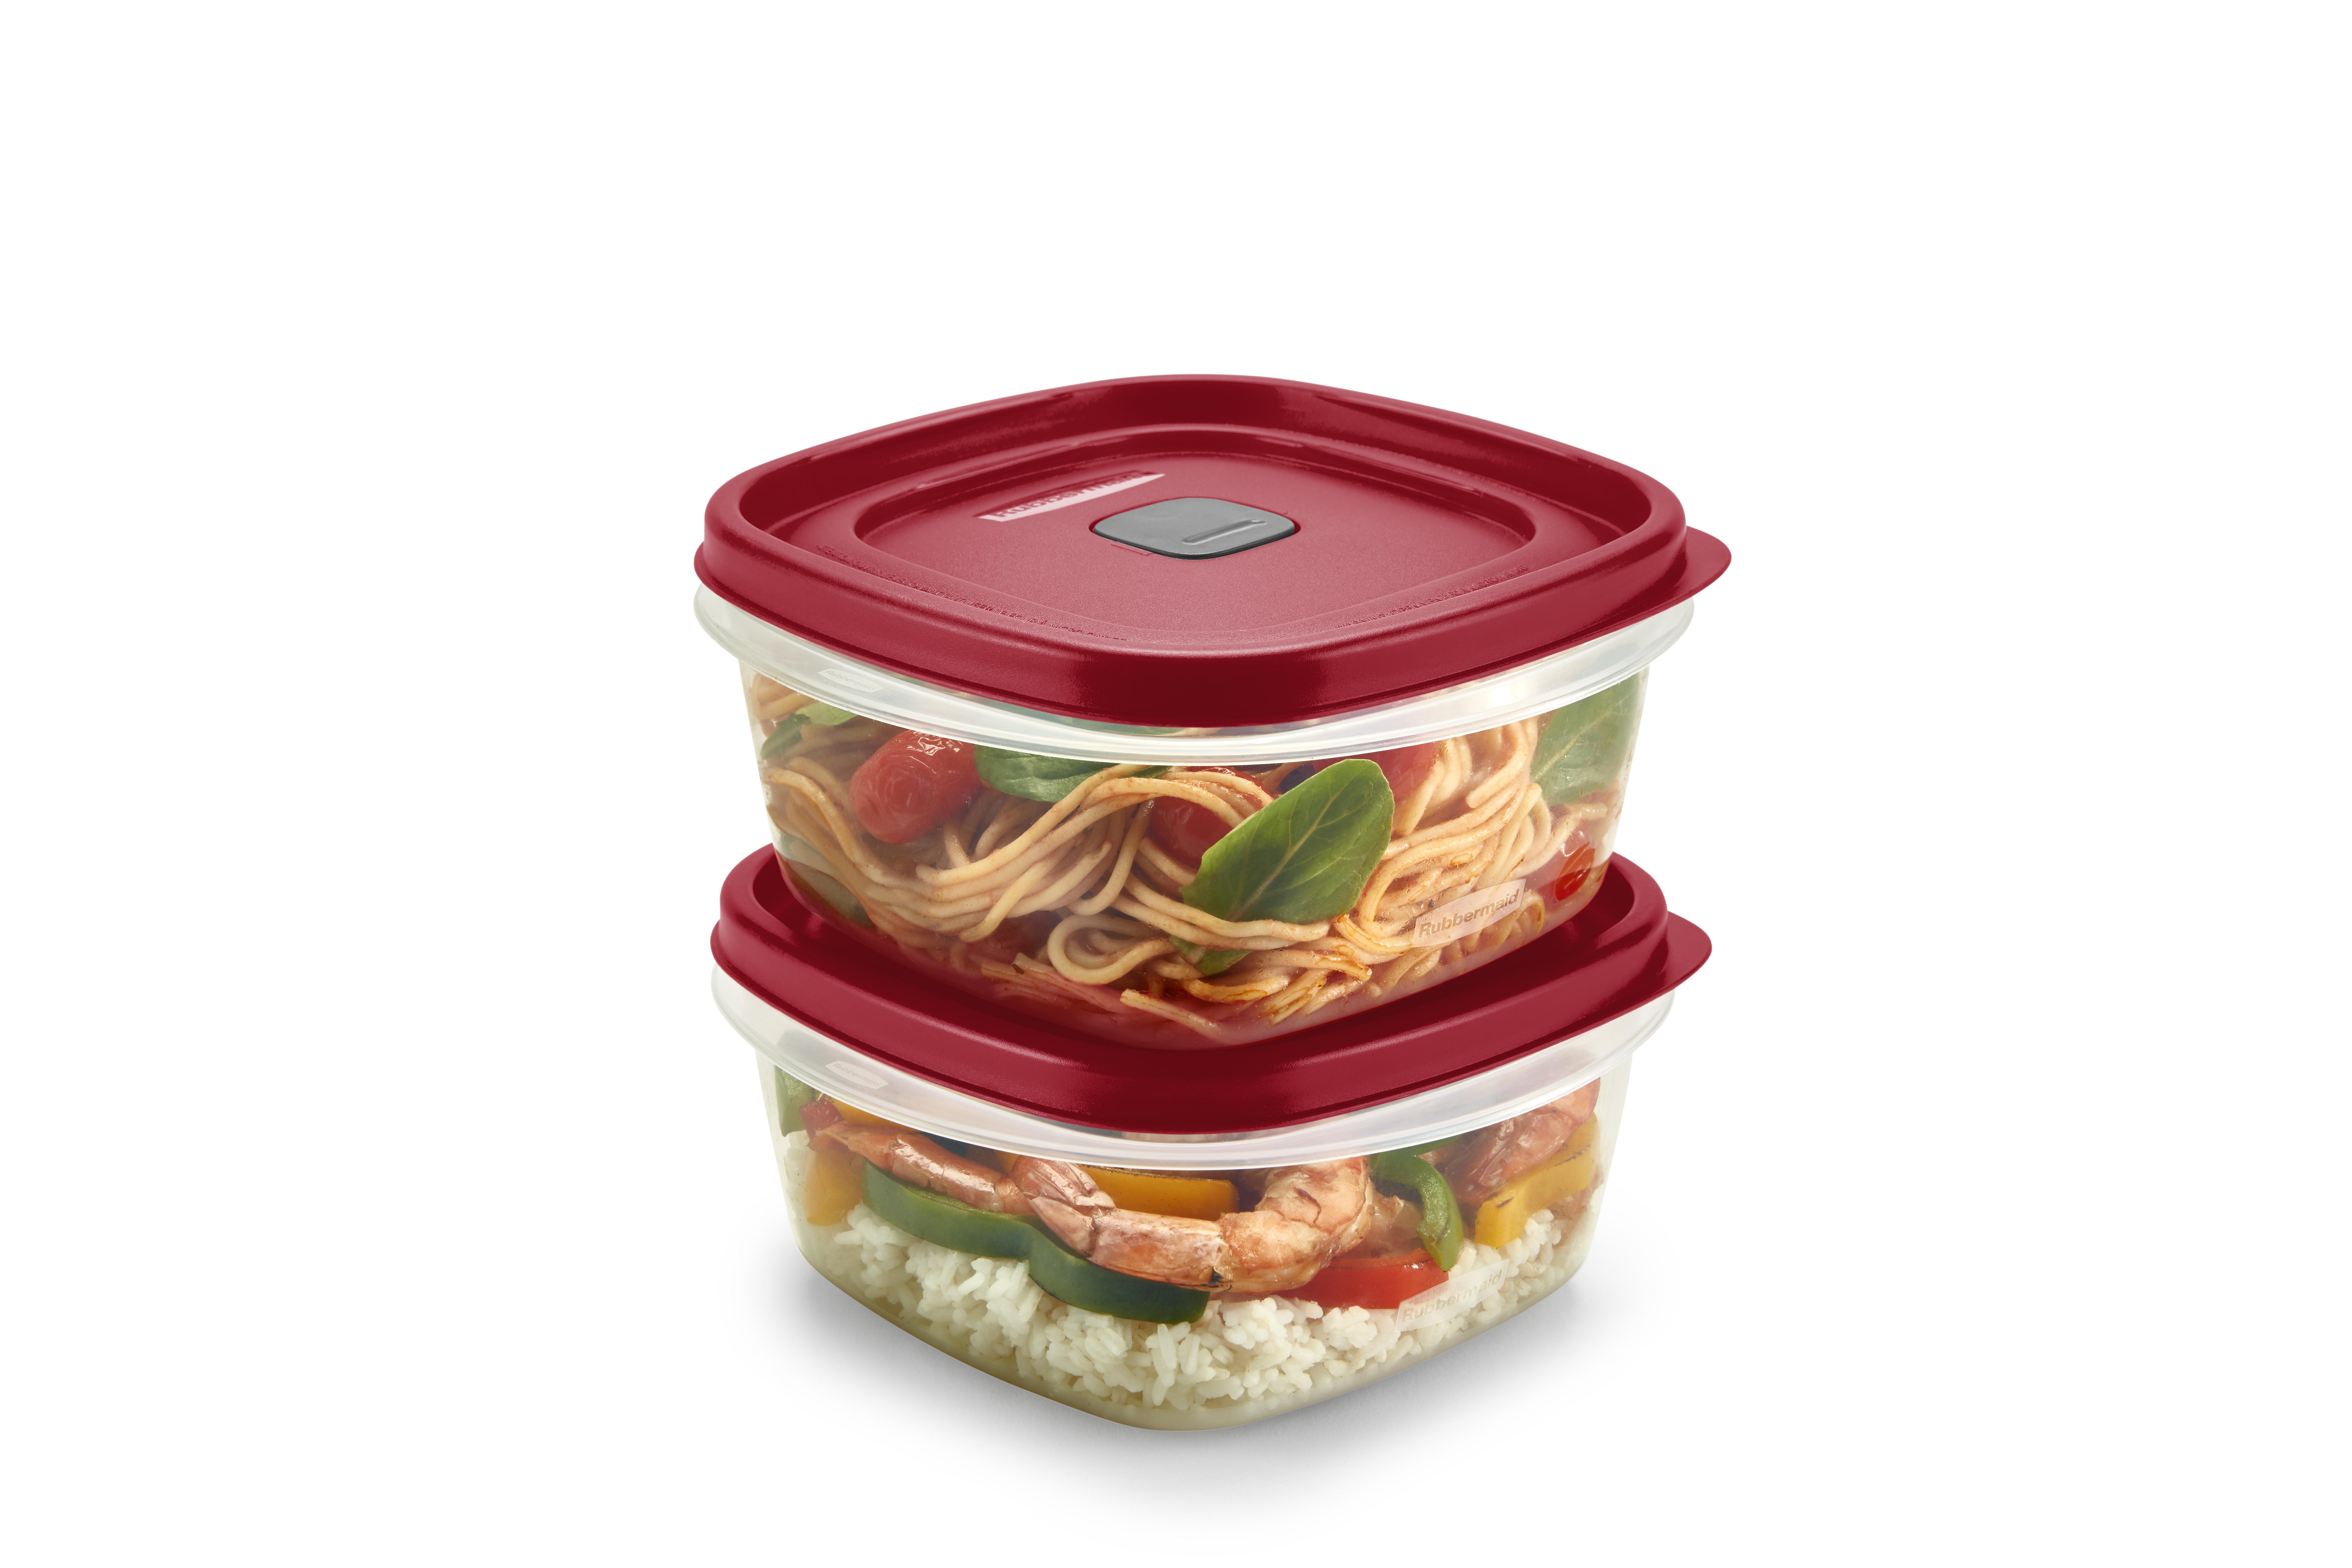 Rubbermaid, Easy Find Lids, Food Storage Containers with Vented Lids, 28-Piece Set - image 4 of 12